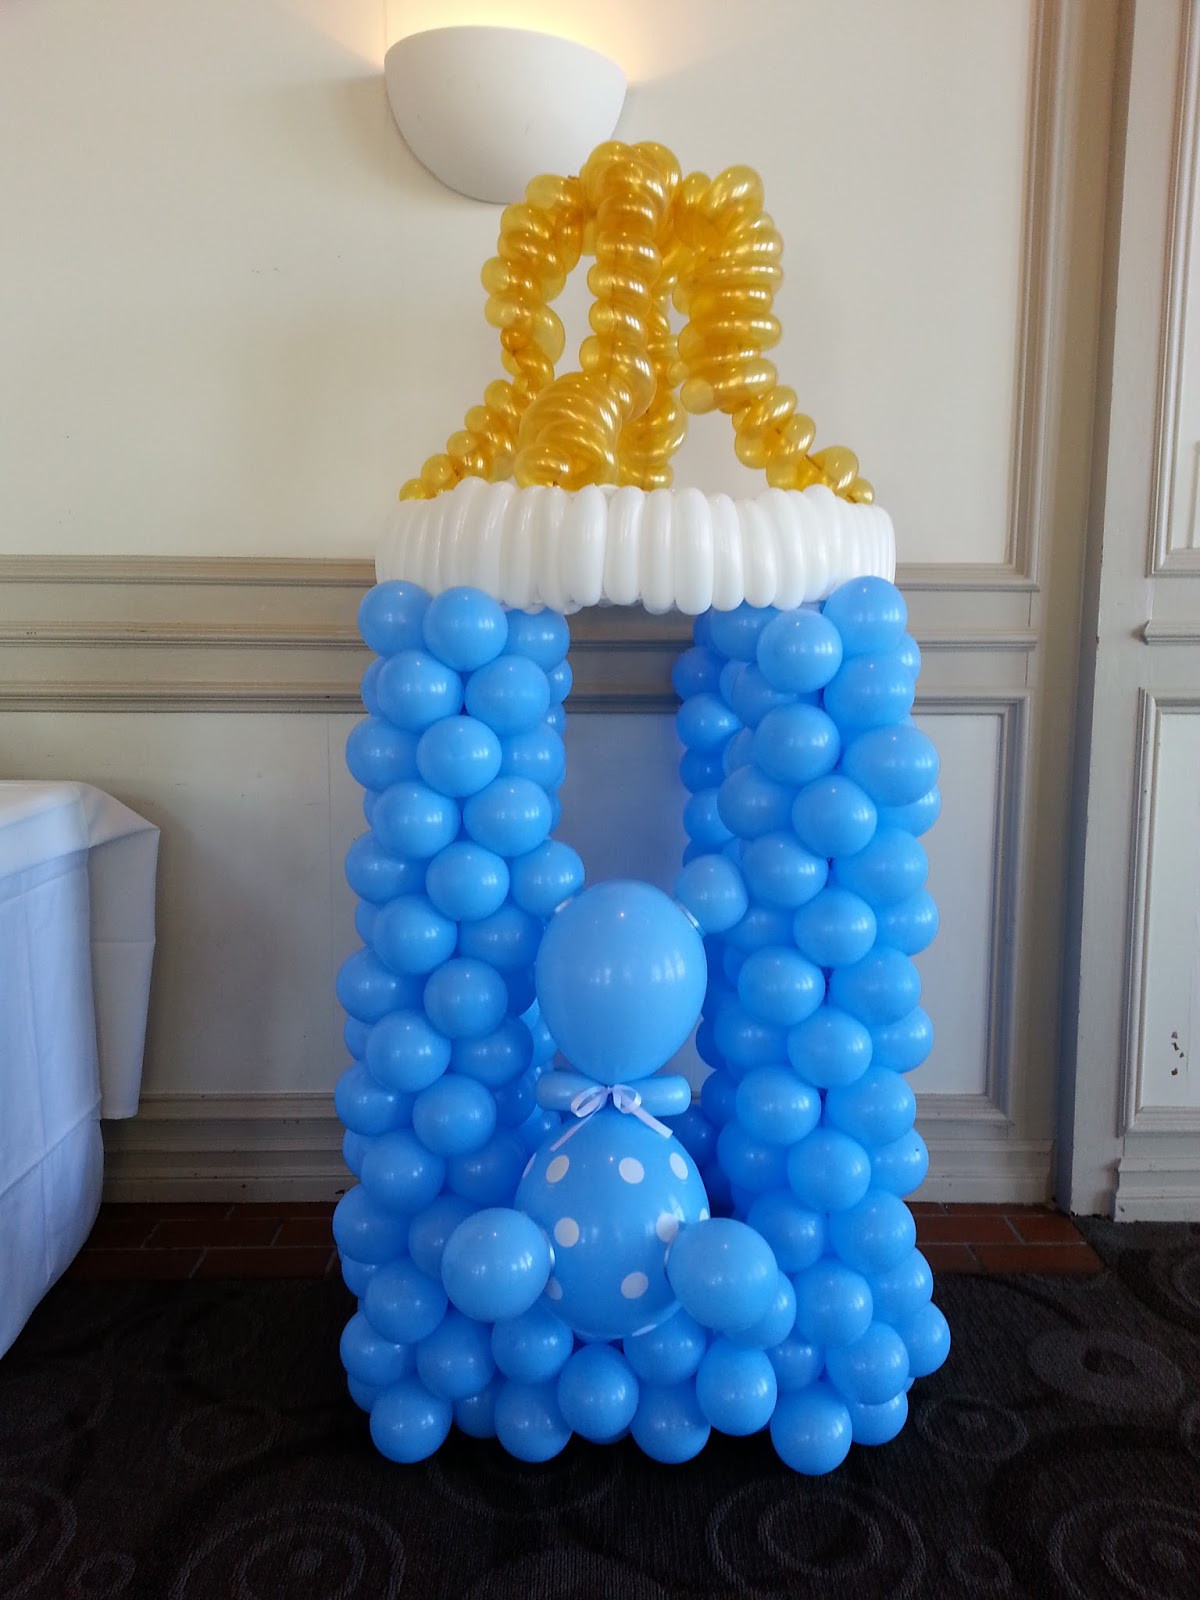 Baby Shower Boy Decoration Ideas
 PoP Balloons A baby shower for a boy